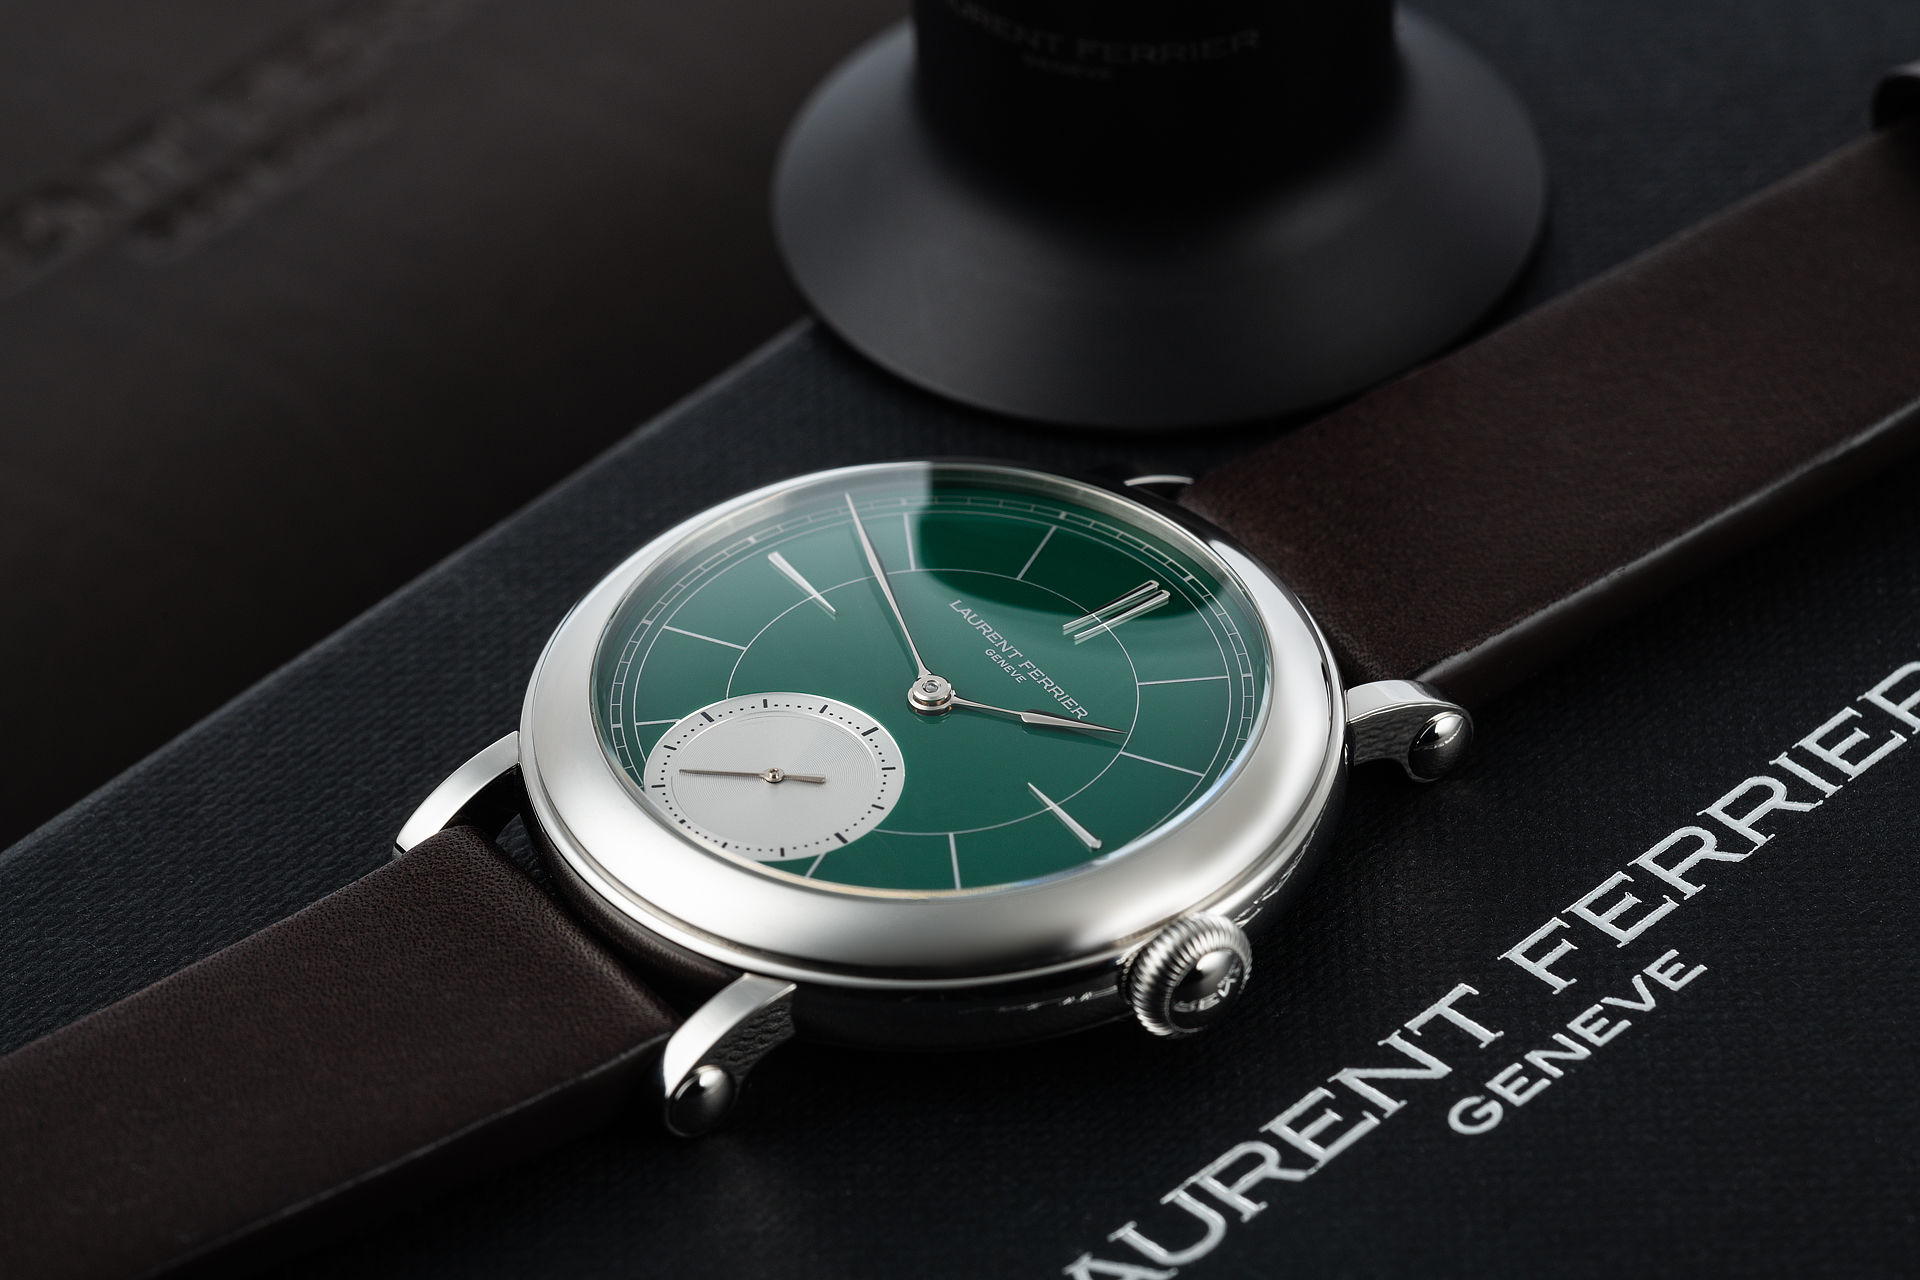 Enamel Dial "Only 5 Made" |  | Laurent Ferrier Galet Micro-Rotor Montre Ecole